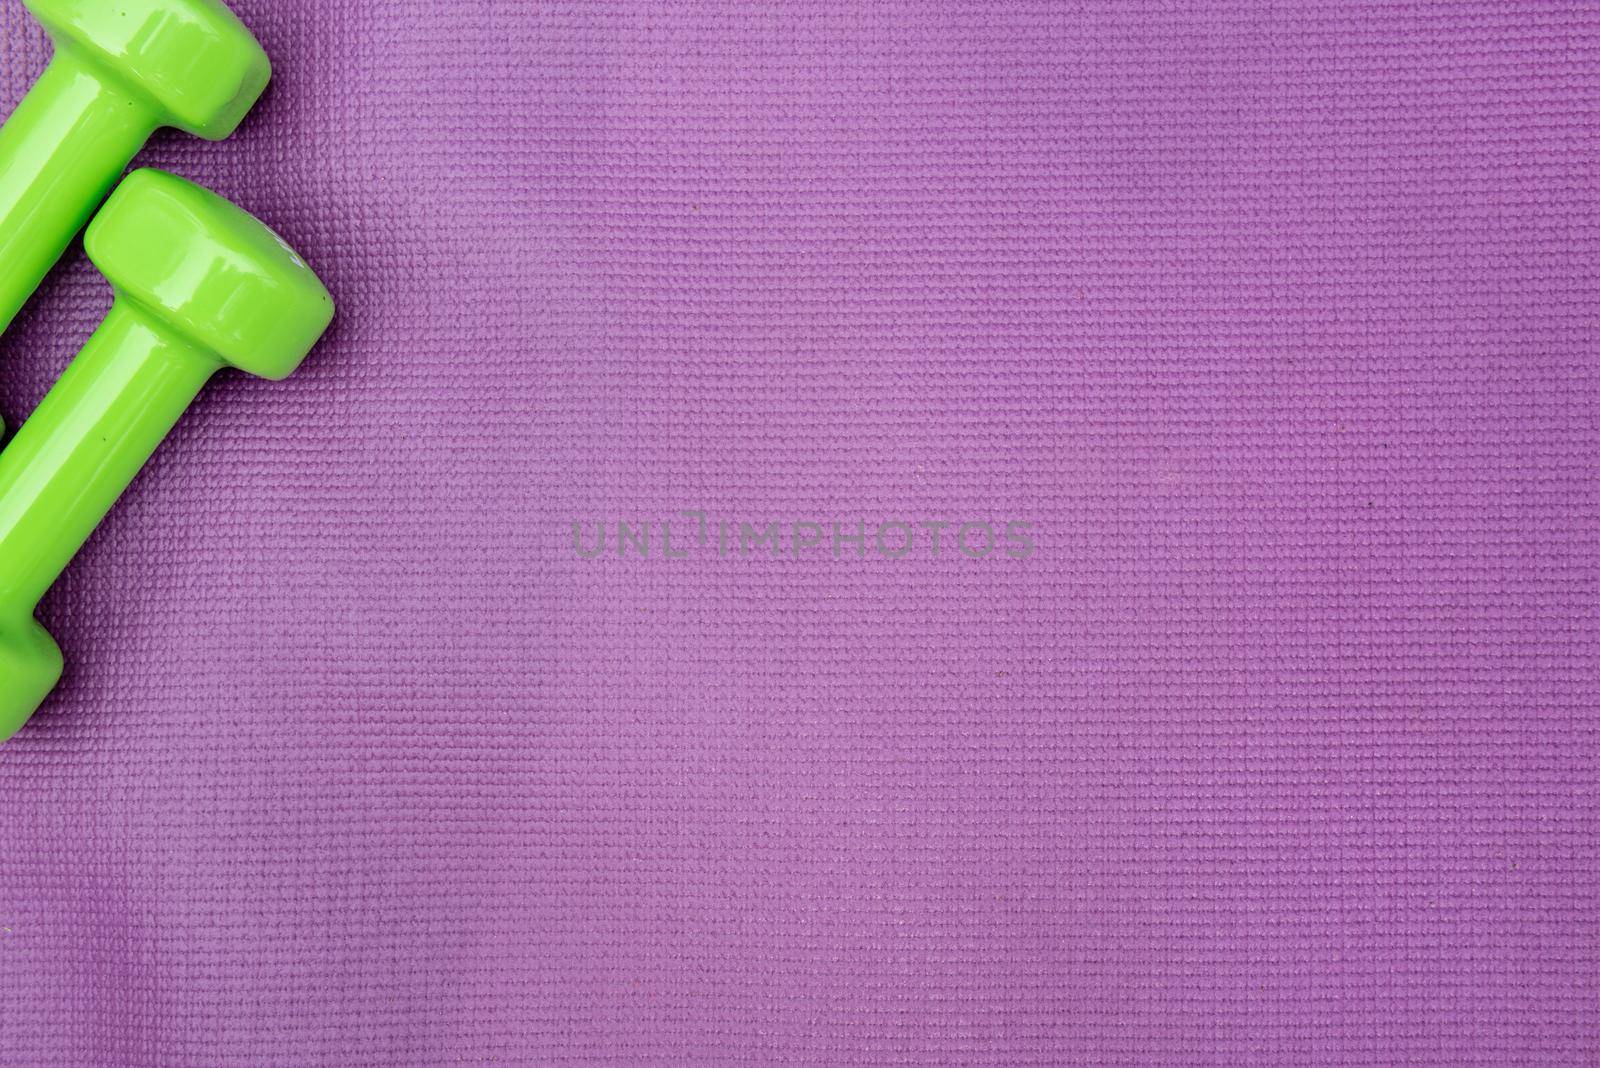 Ladie's dumbbells over purple fitness mat, top view. by anytka